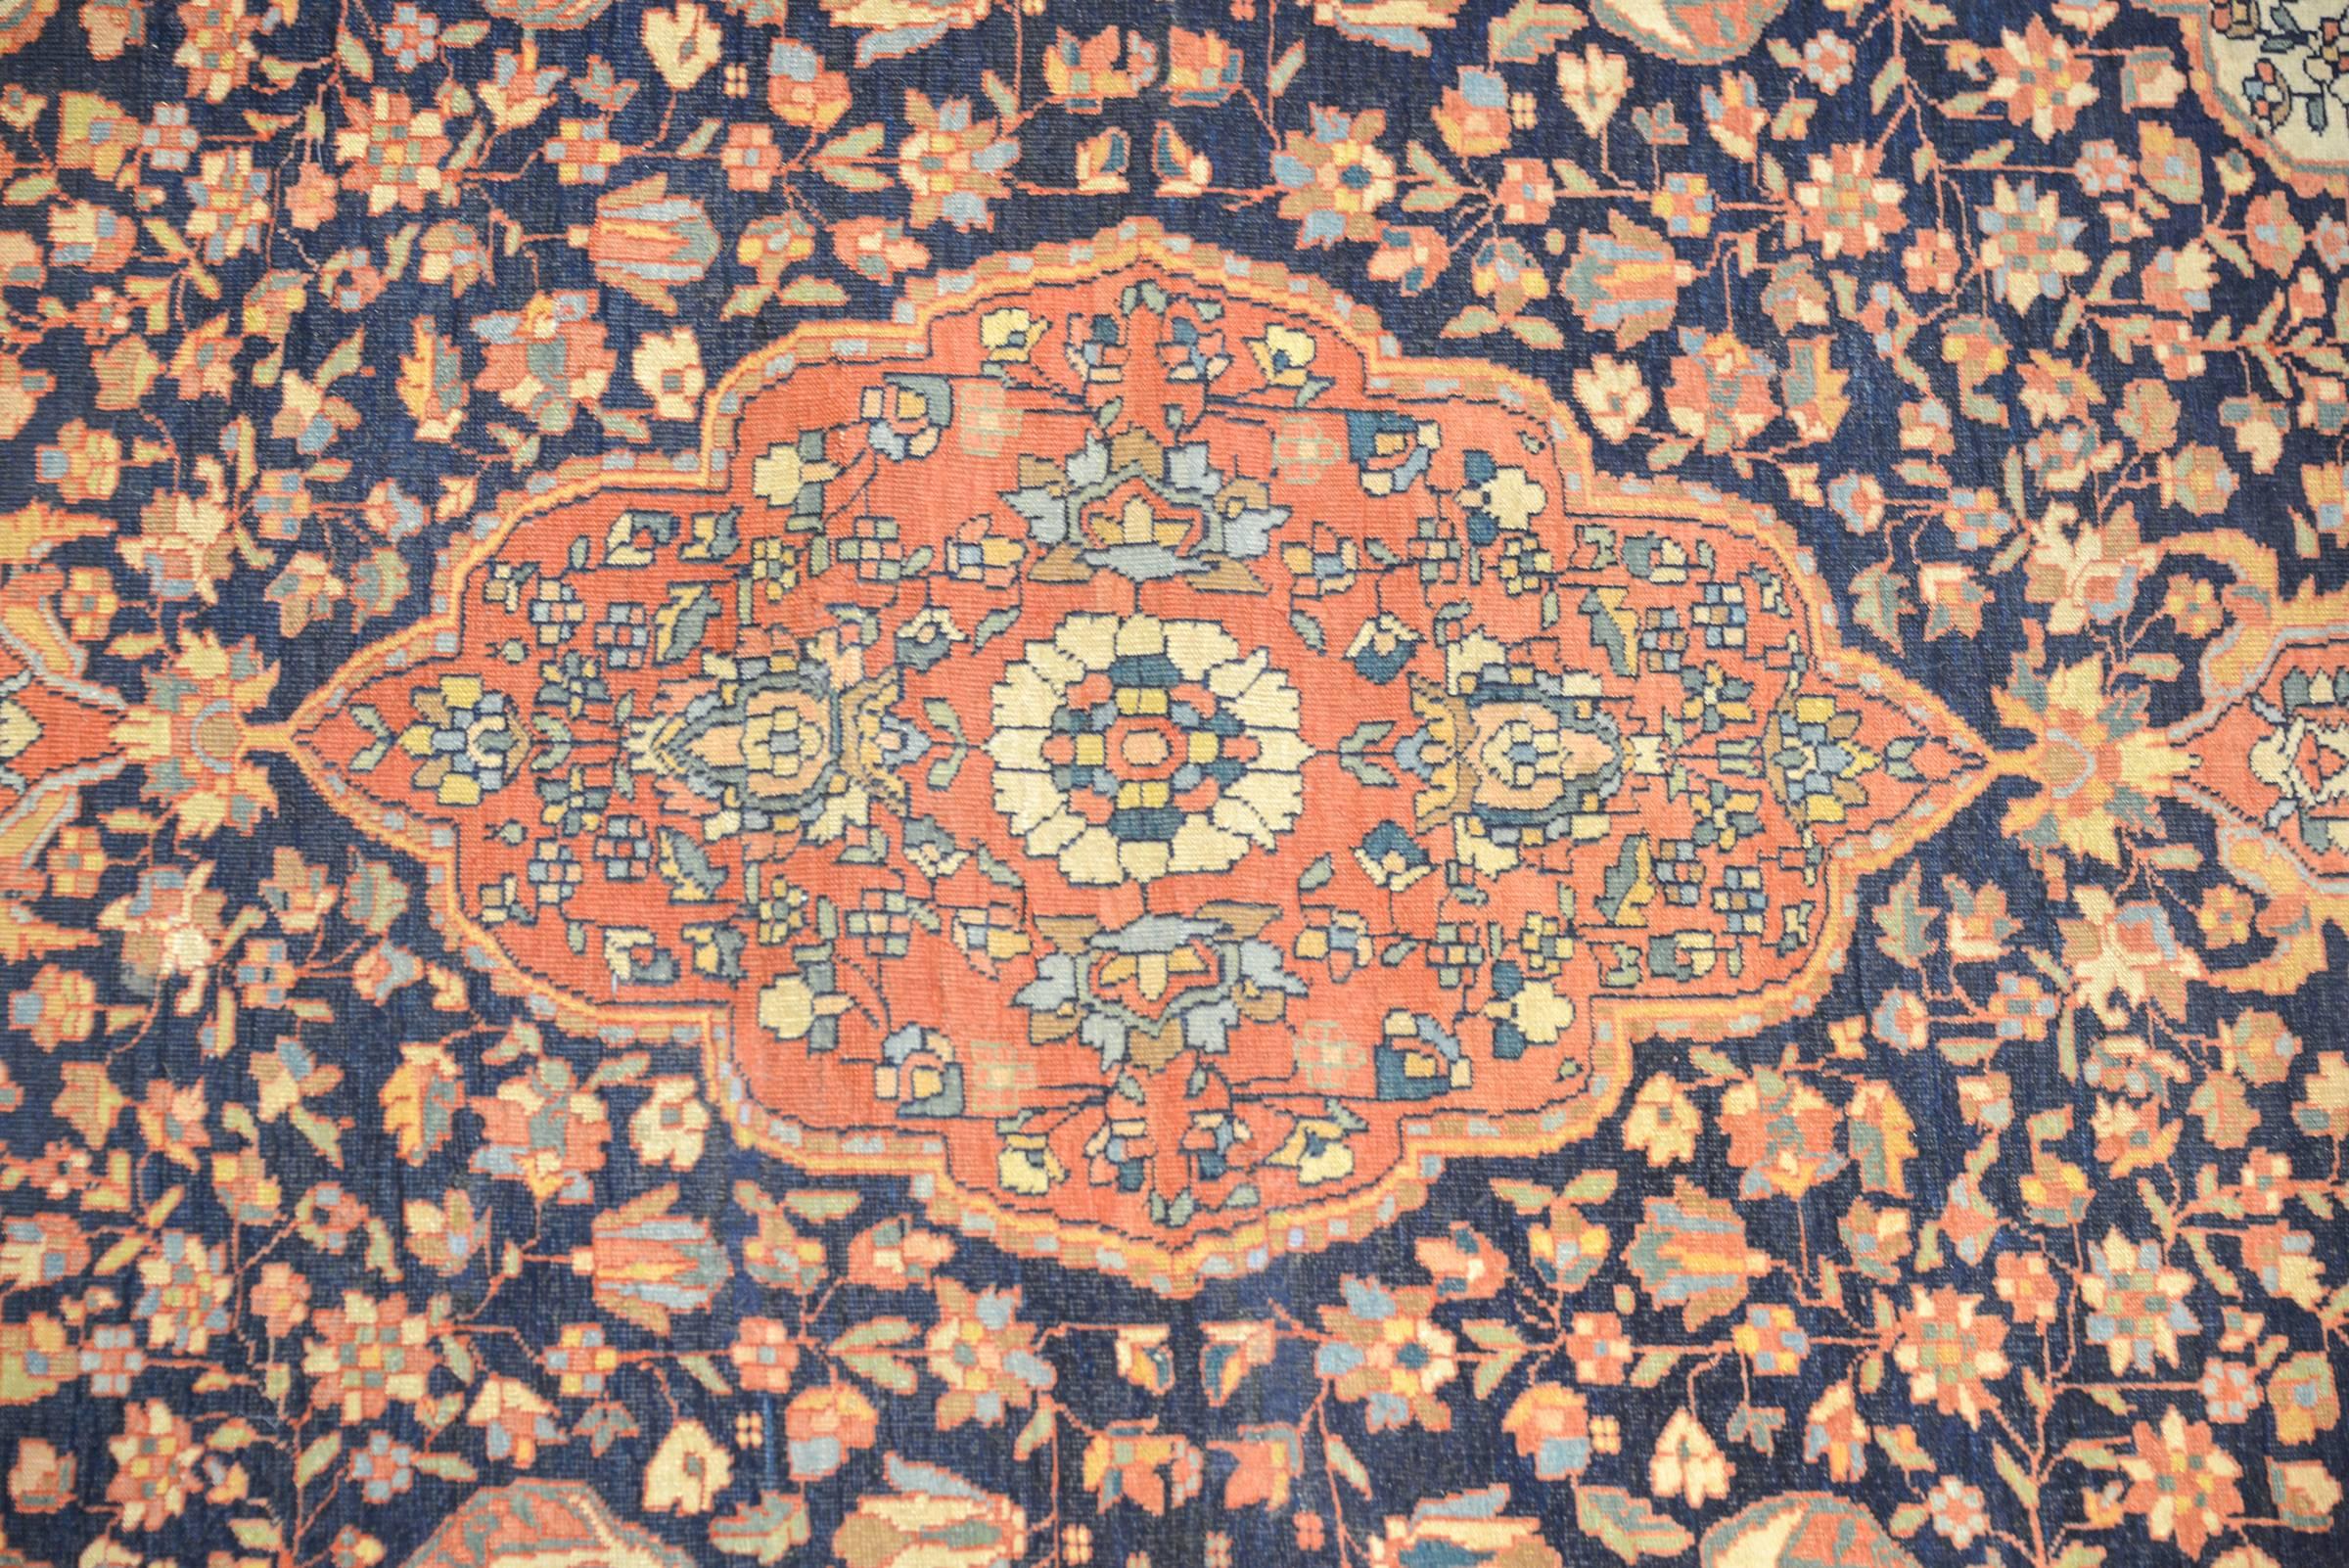 An exceptional late 19th century Persian Sarouk Farahan rug with a wonderful large crimson medallion woven with a tight floral and vine pattern, on a dark indigo field with scrolling vines and leaves. The border is wide with a complementary floral